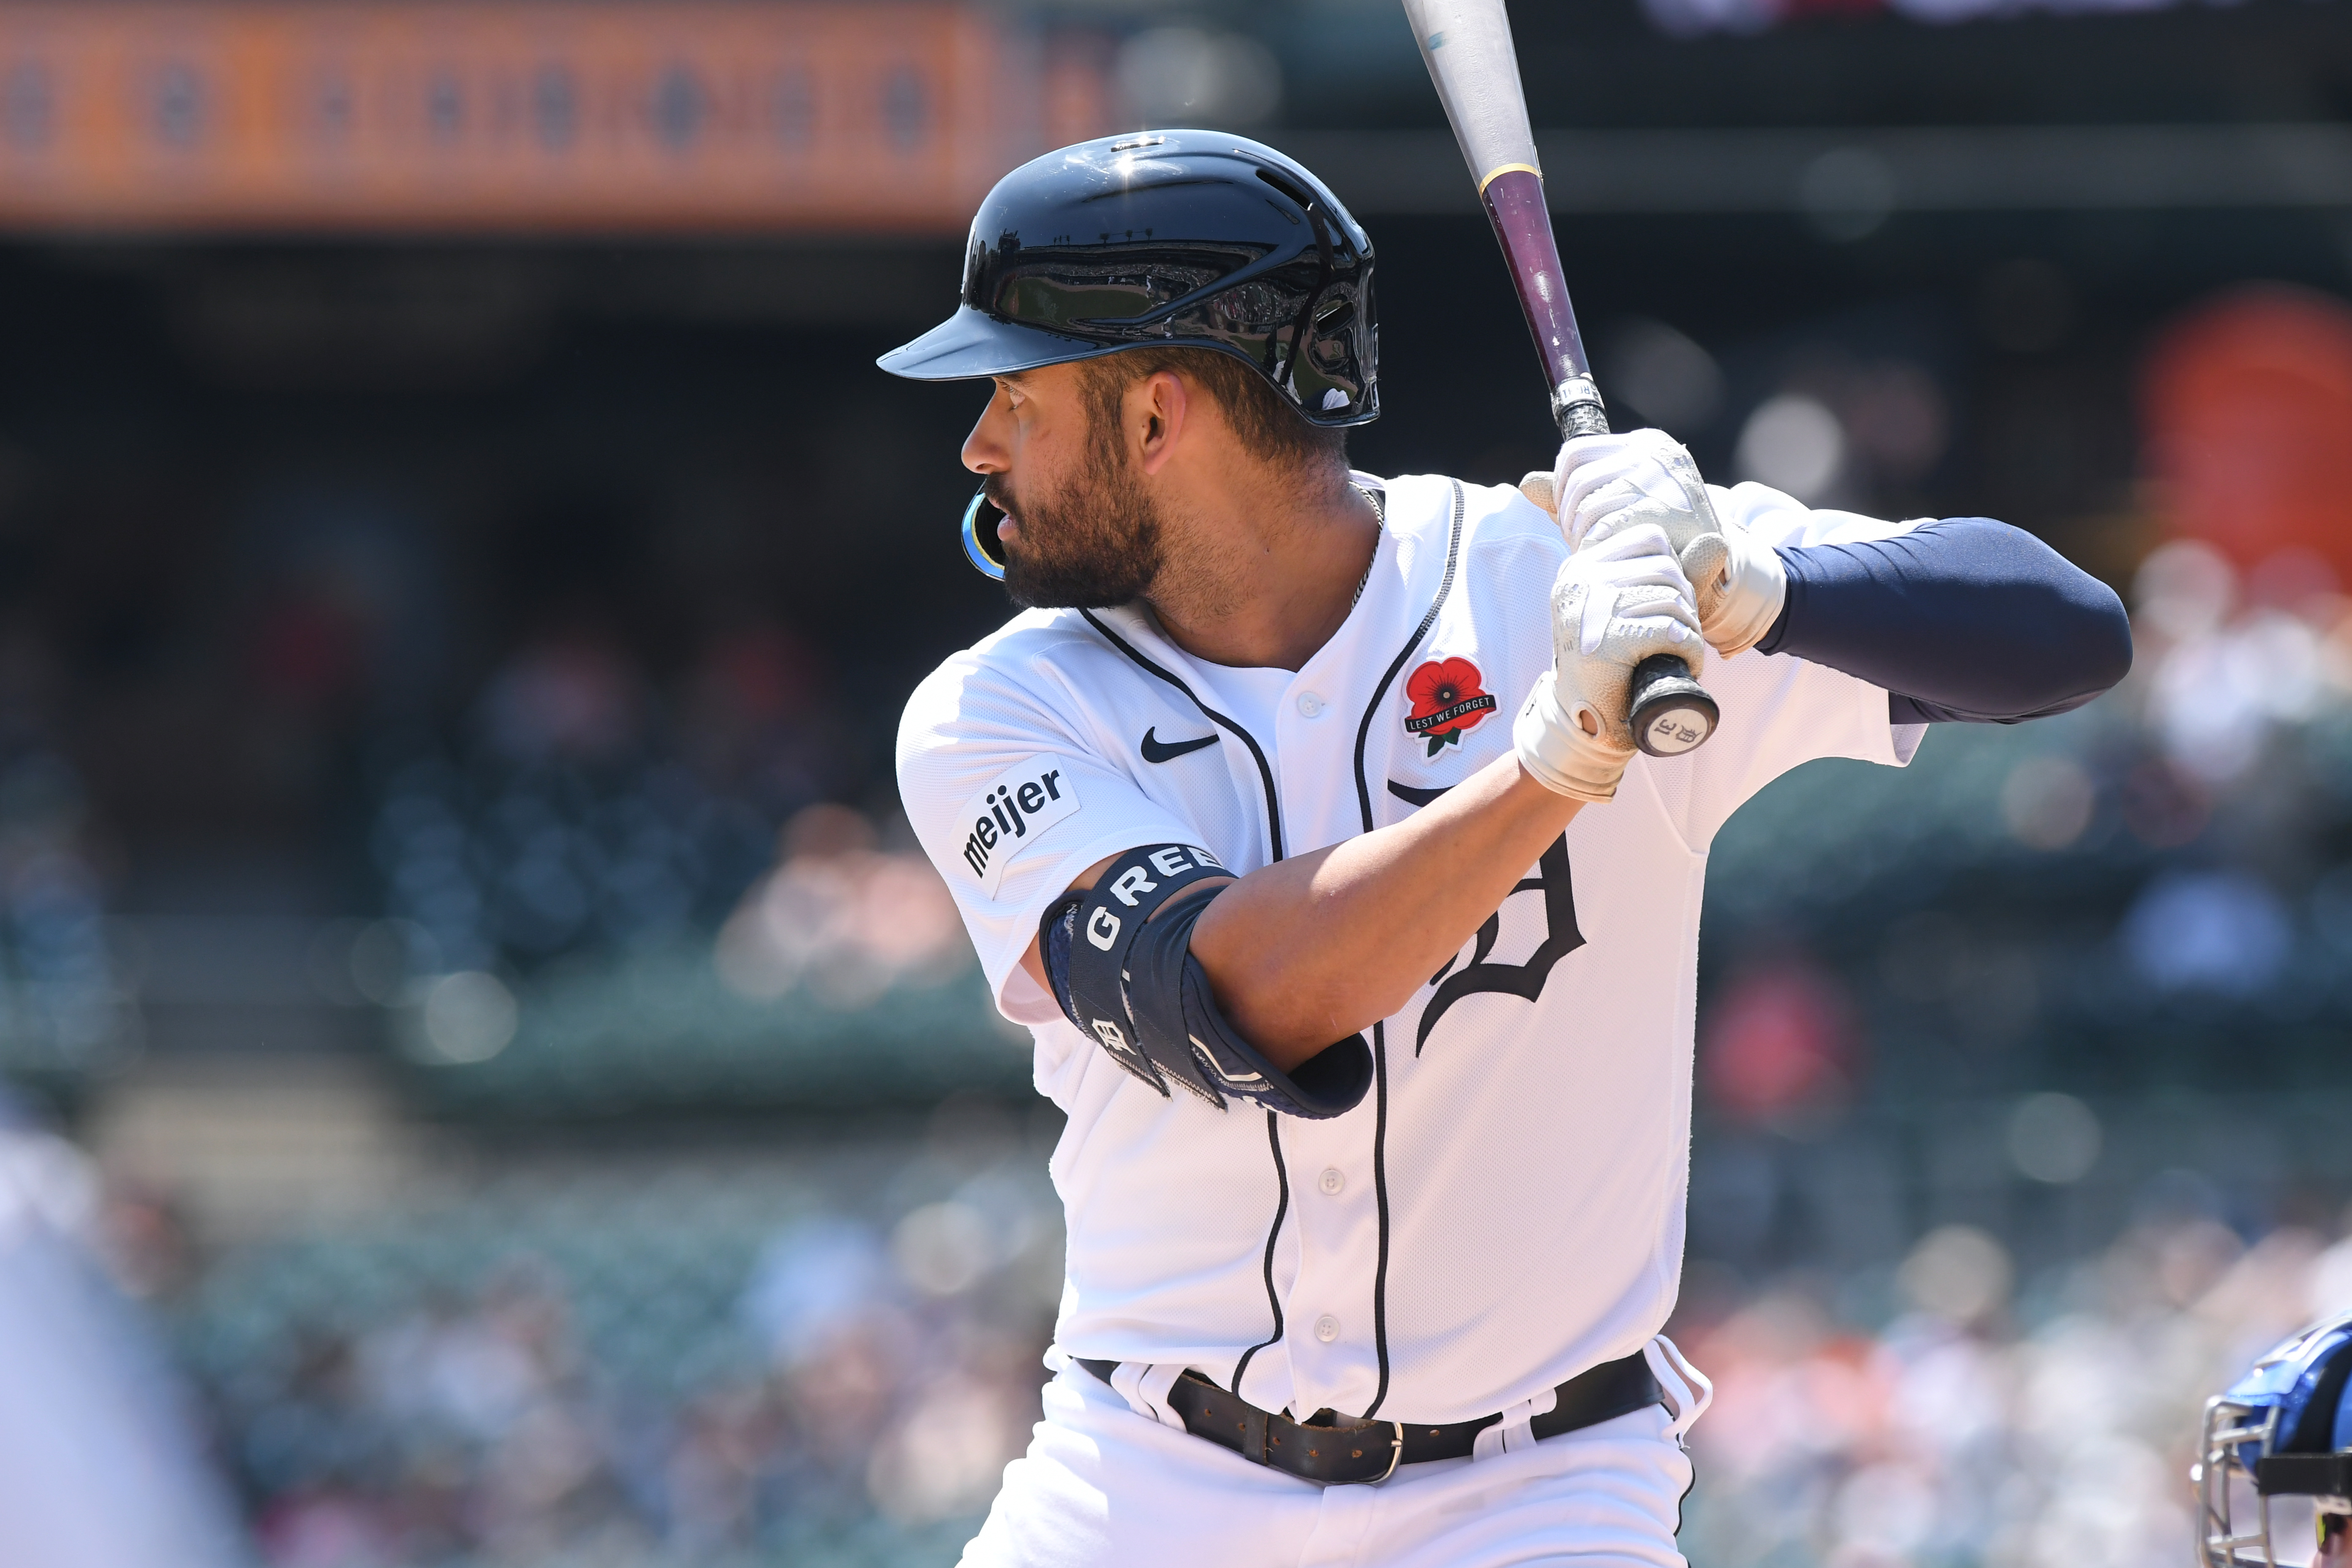 Riley Greene of the Detroit Tigers bats during the game against the Texas Rangers at Comerica Park on May 29, 2023 in Detroit, Michigan. The Rangers defeated the Tigers 5-0.